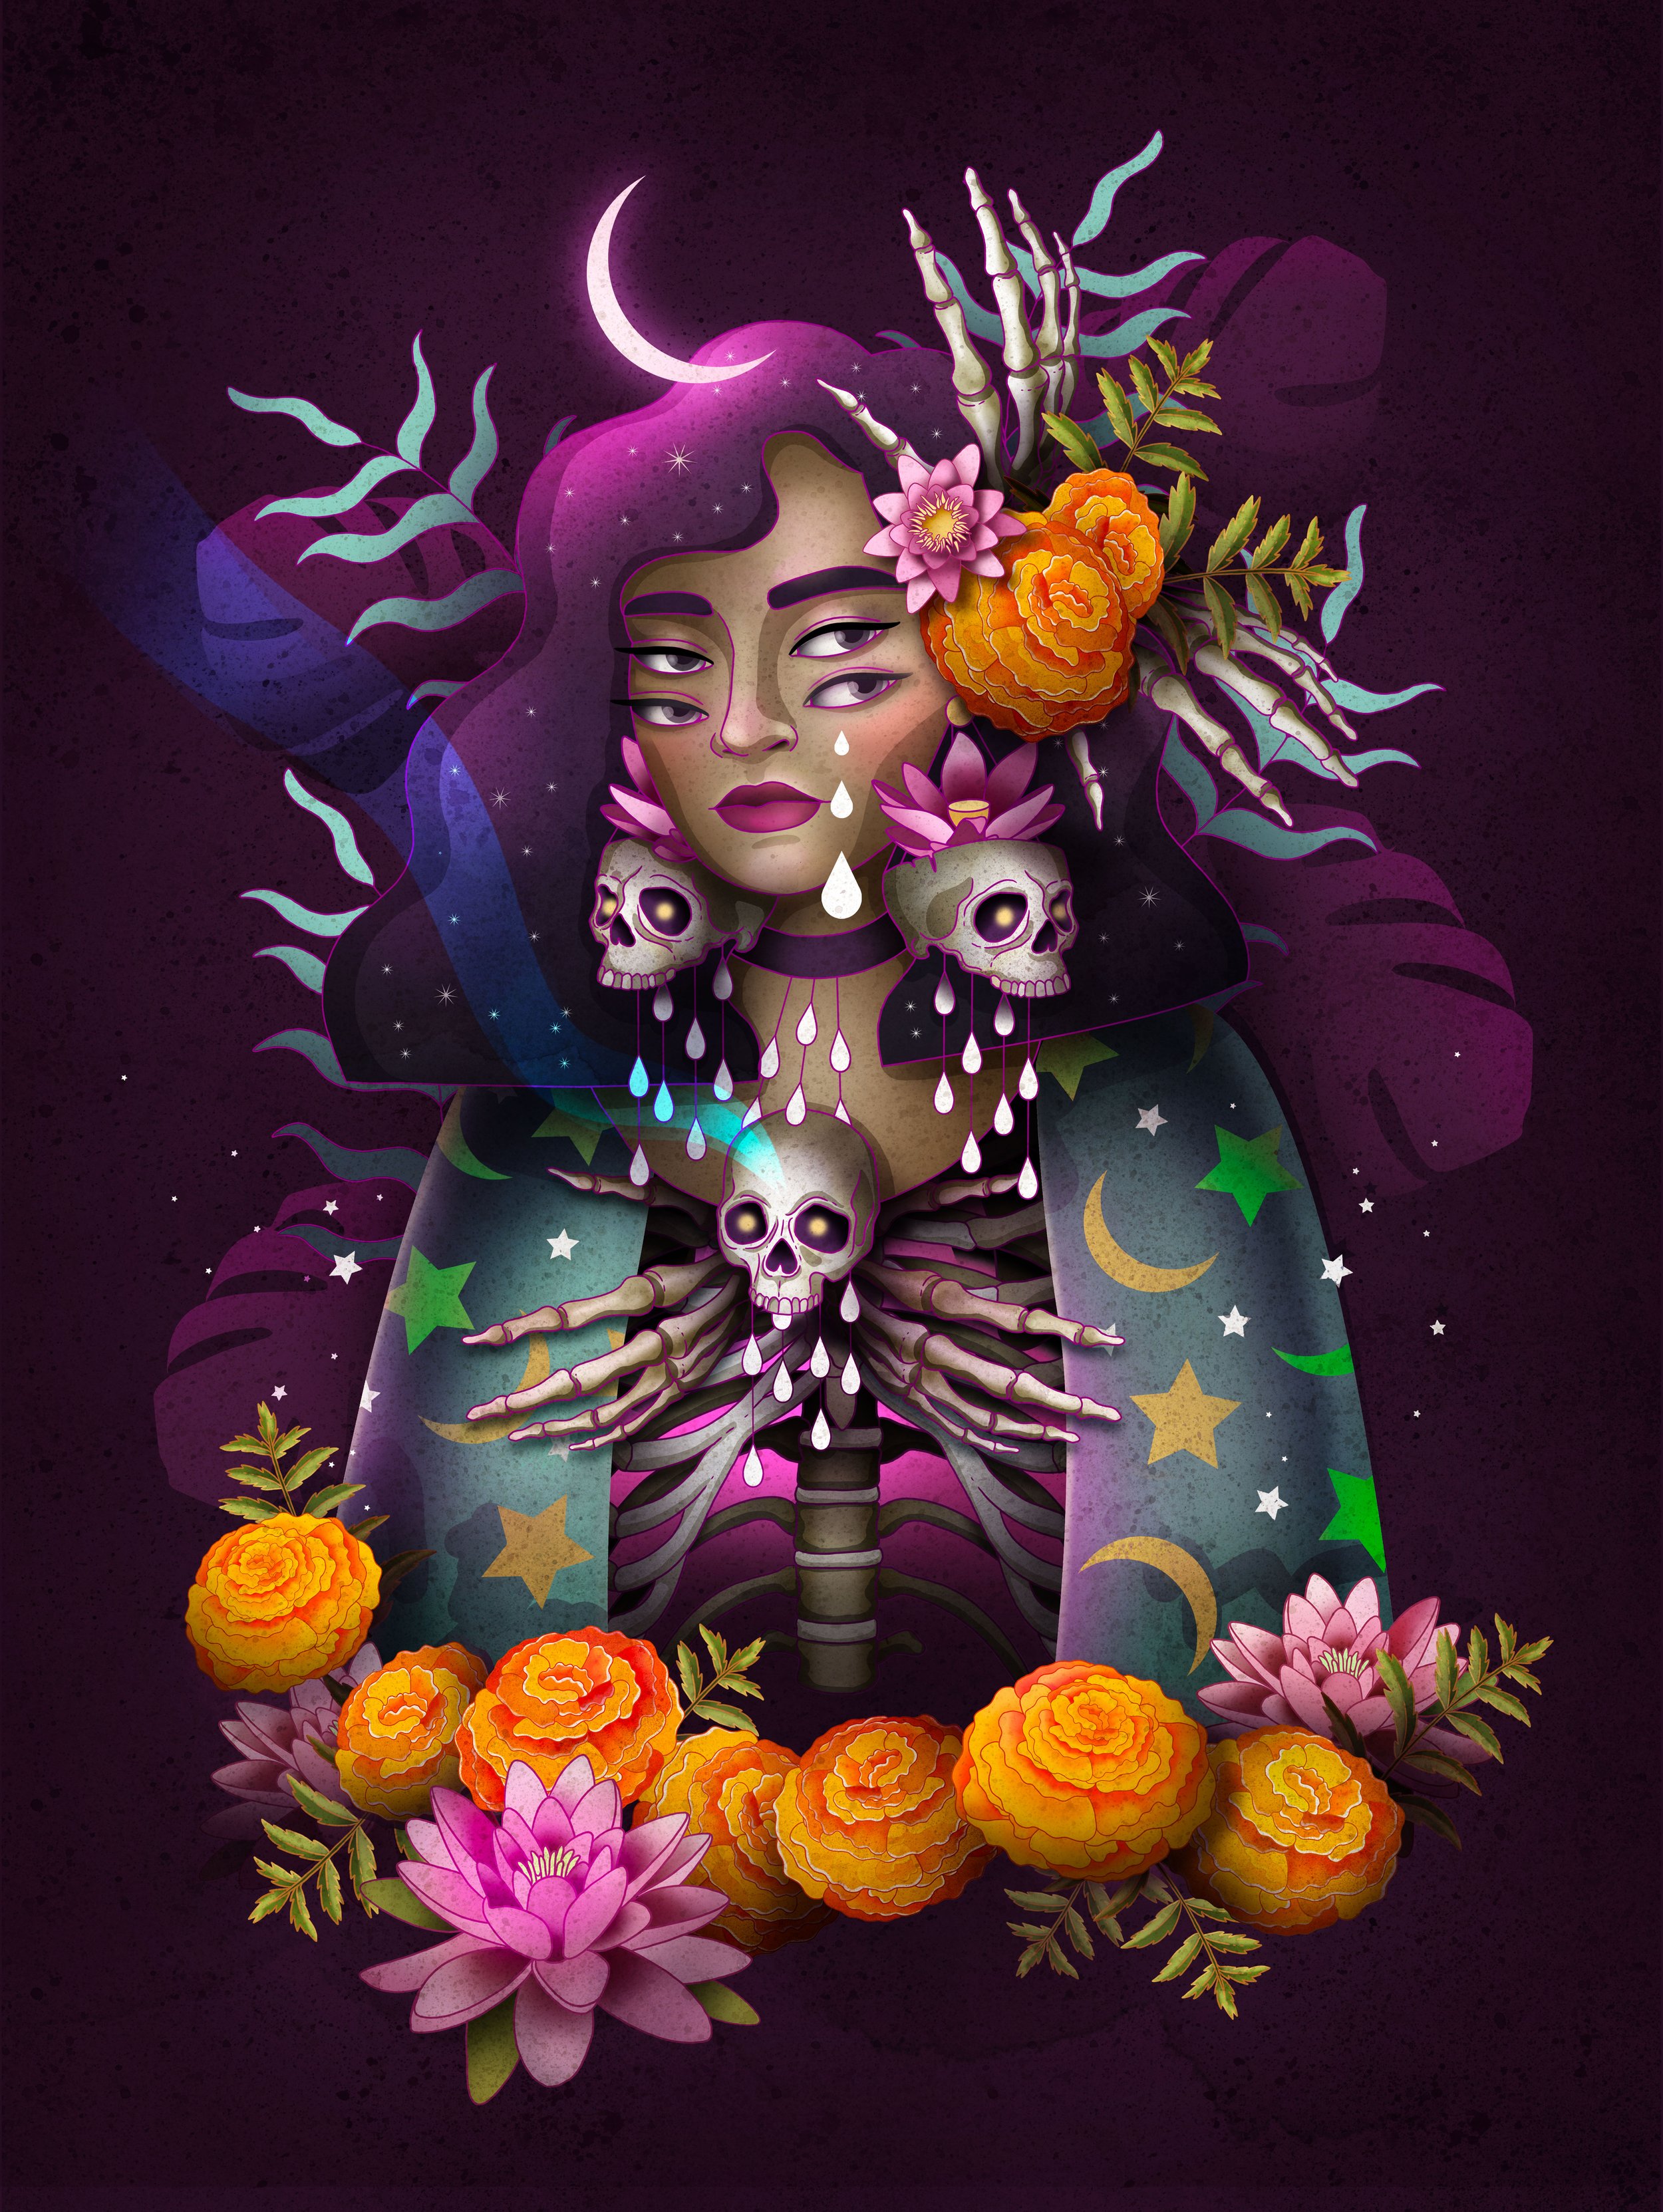  Purple witch by Mexican artist and illustrator Ale De la Torre 